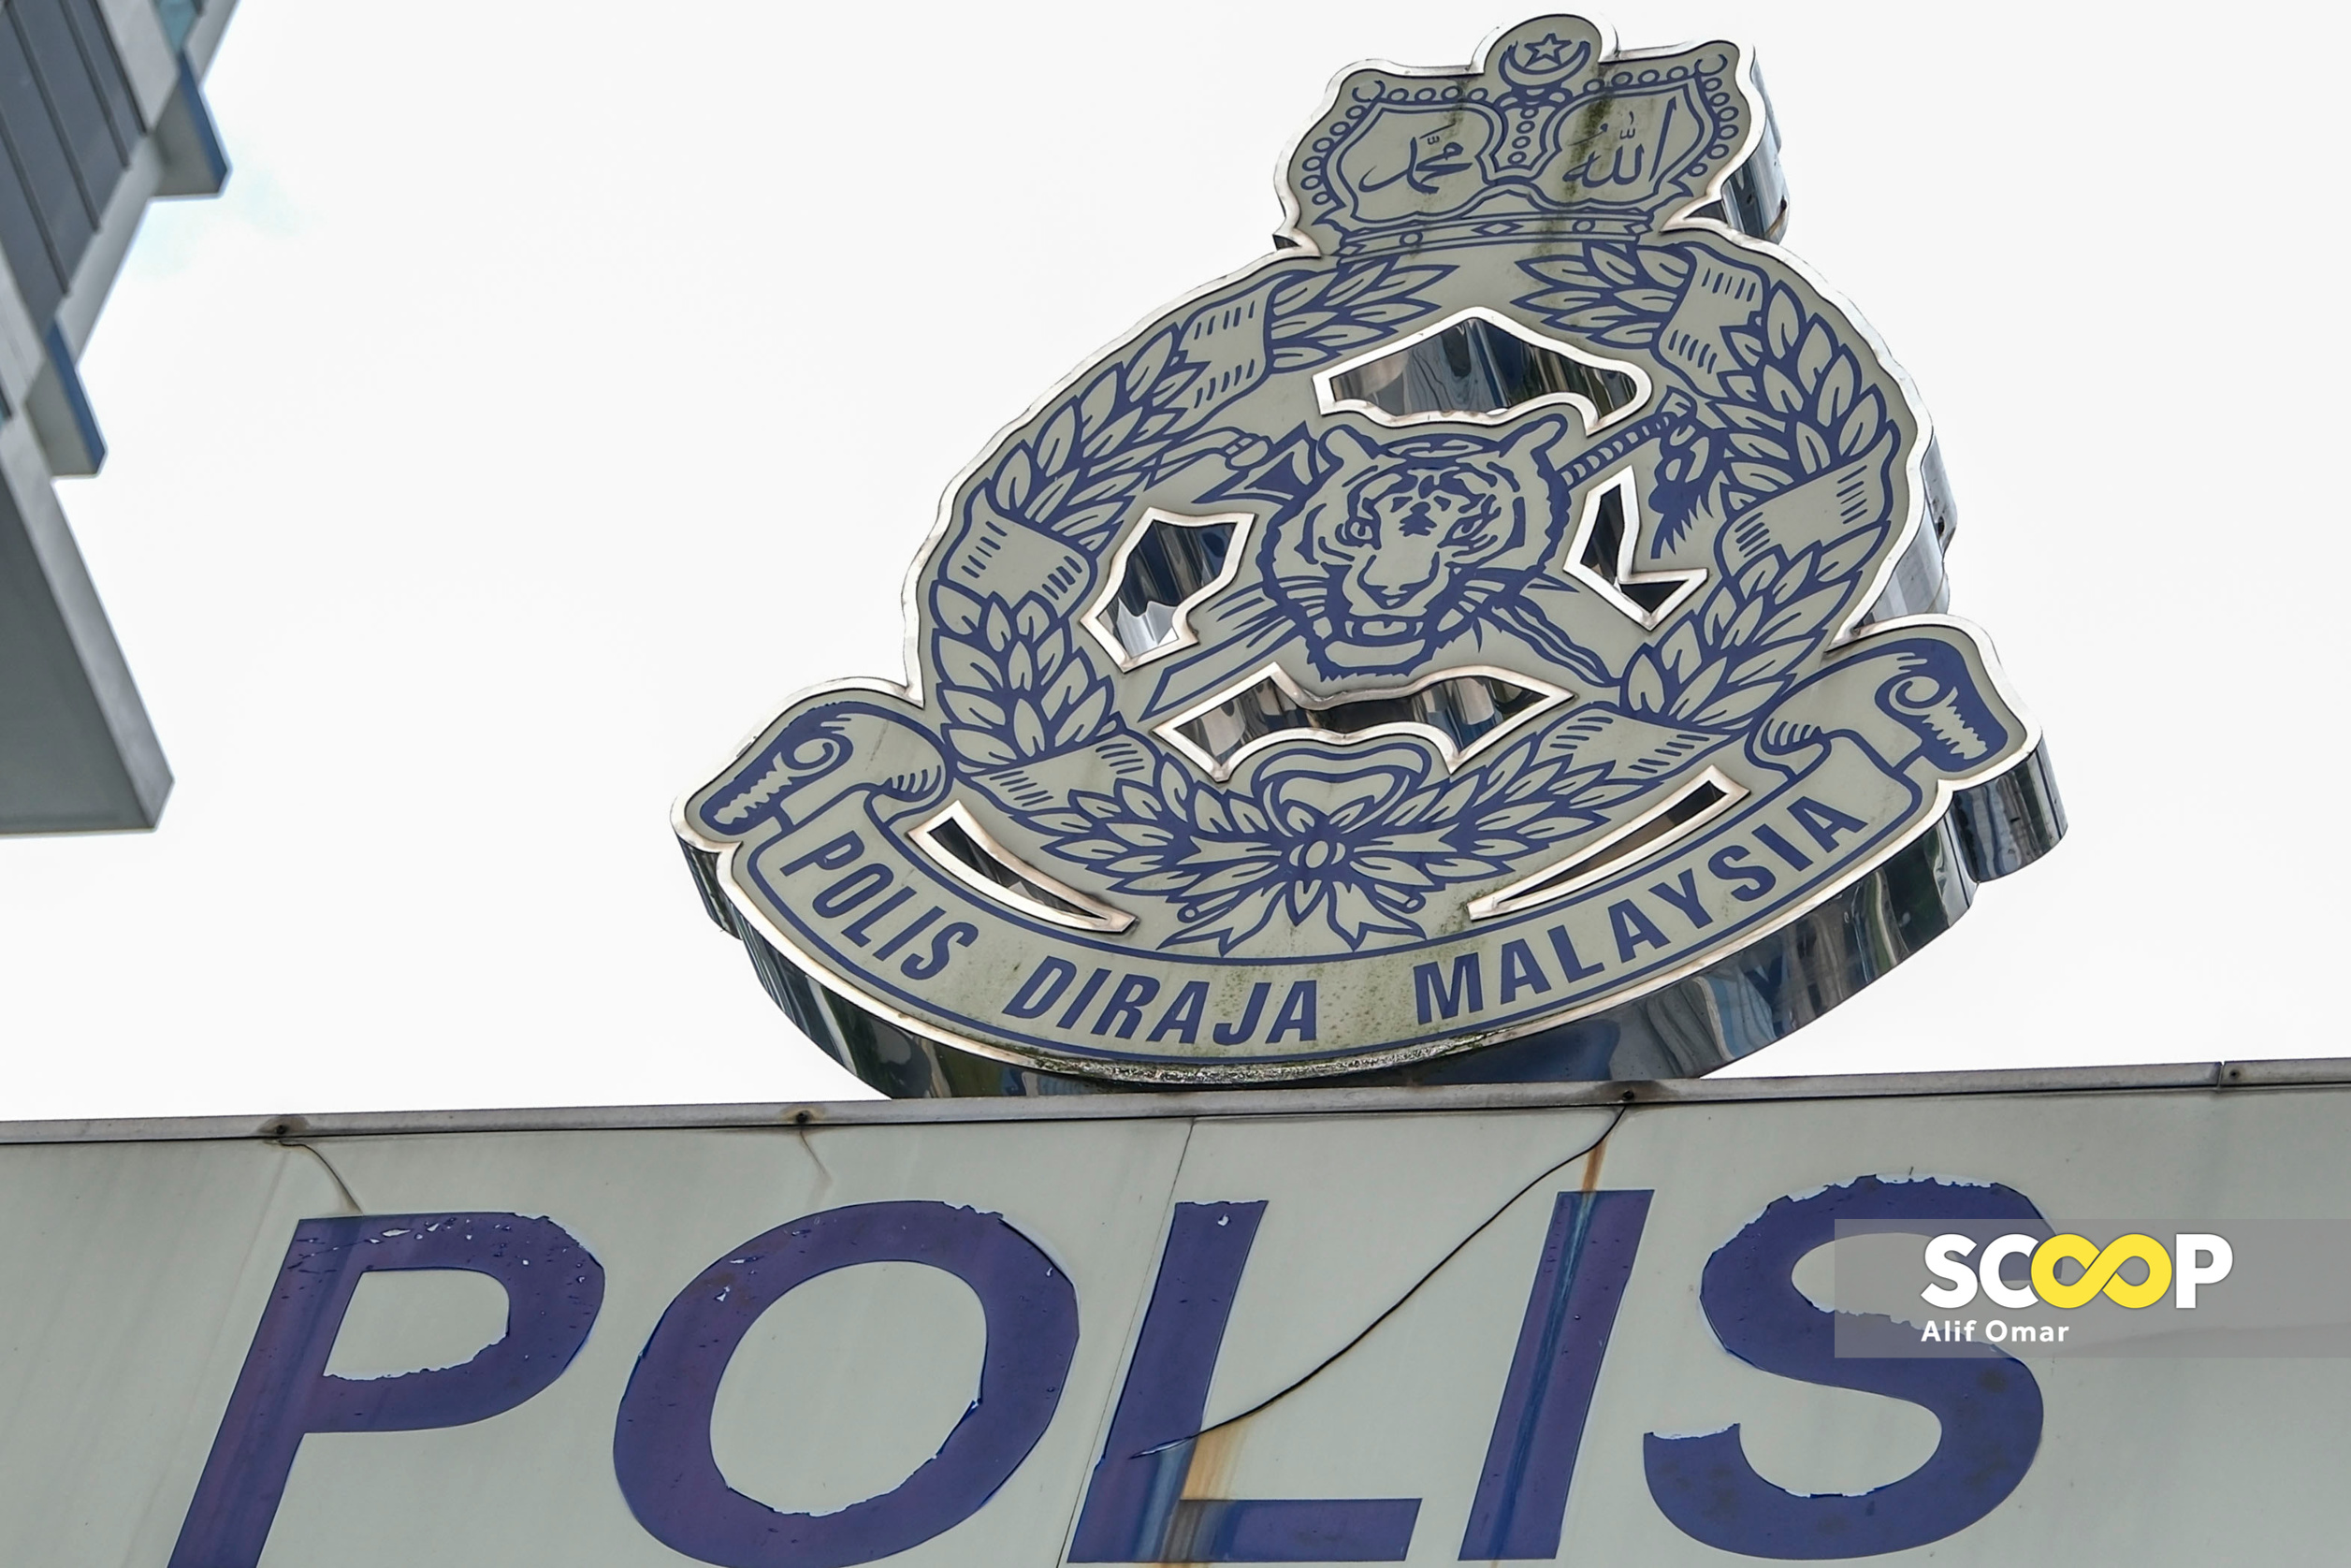 Police sergeant remanded again to assist in another rape probe